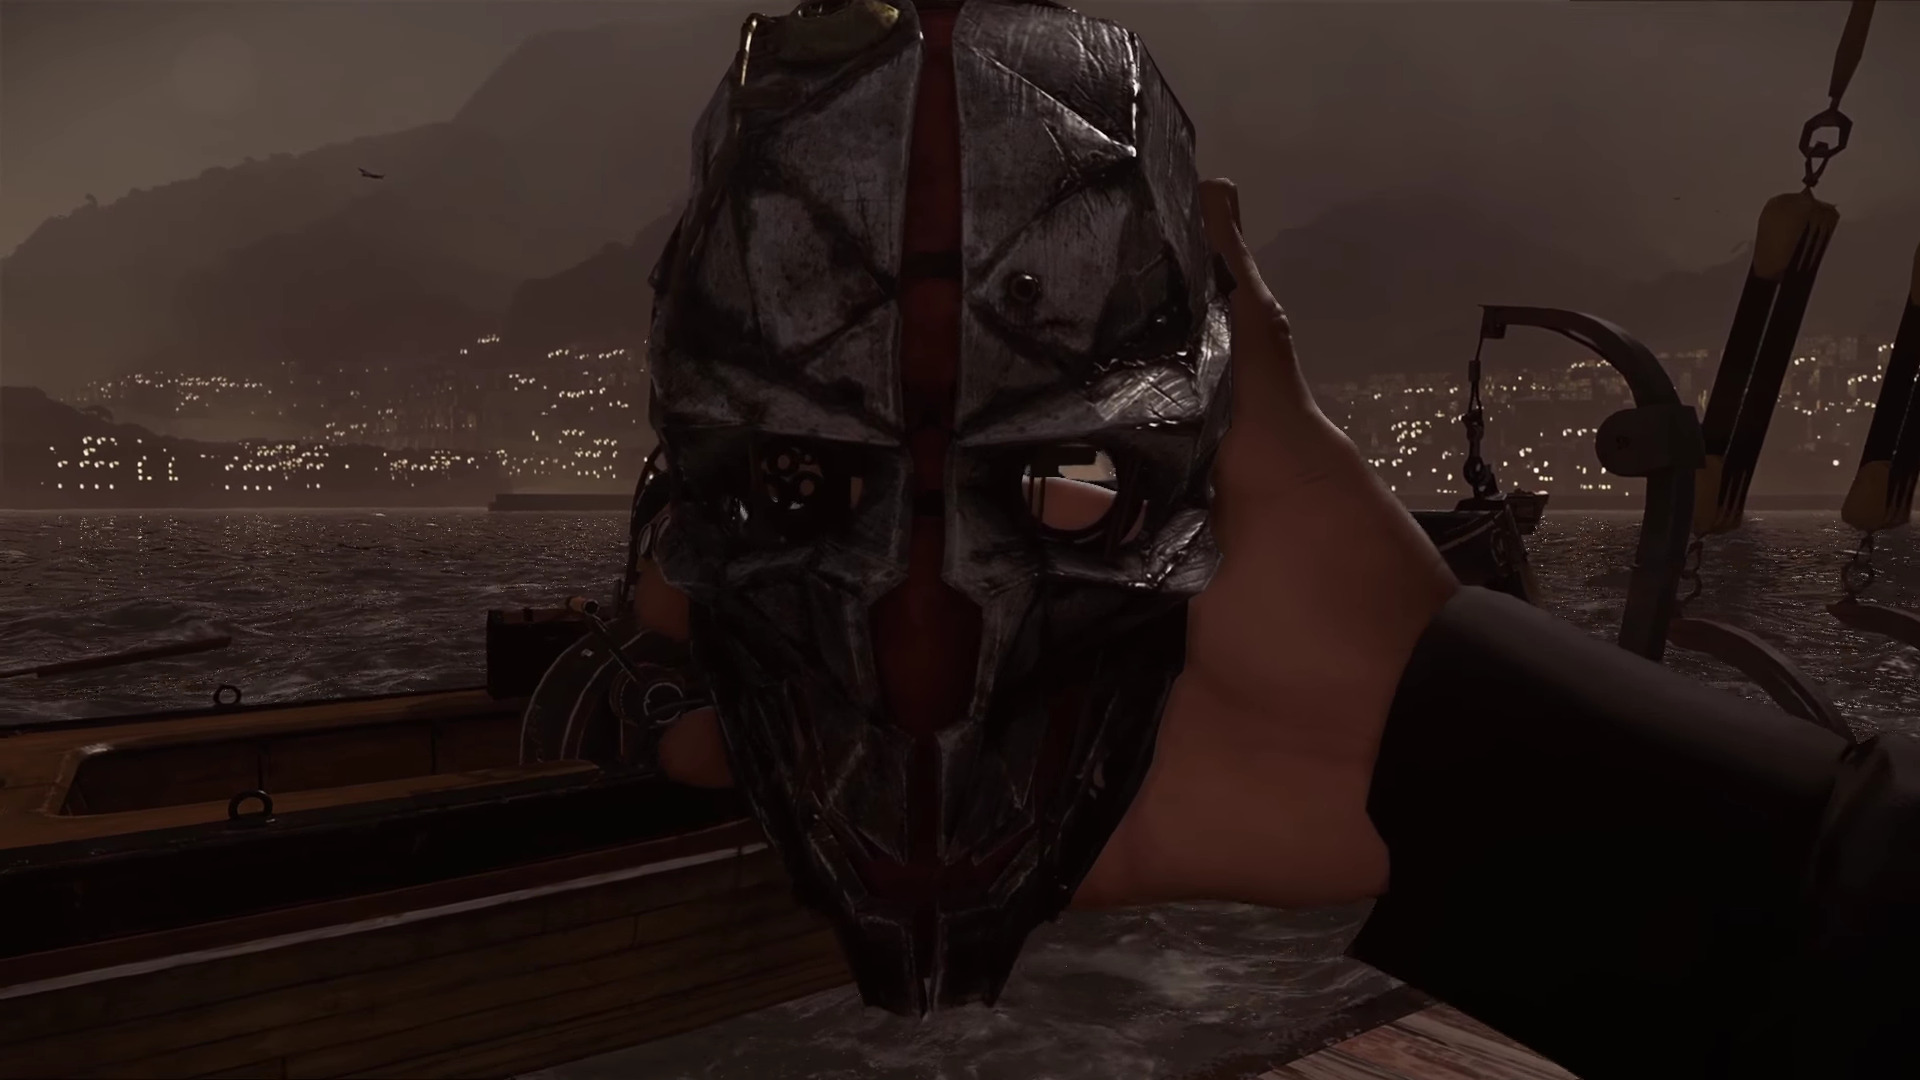 Dishonored 2 - Official Launch Trailer 